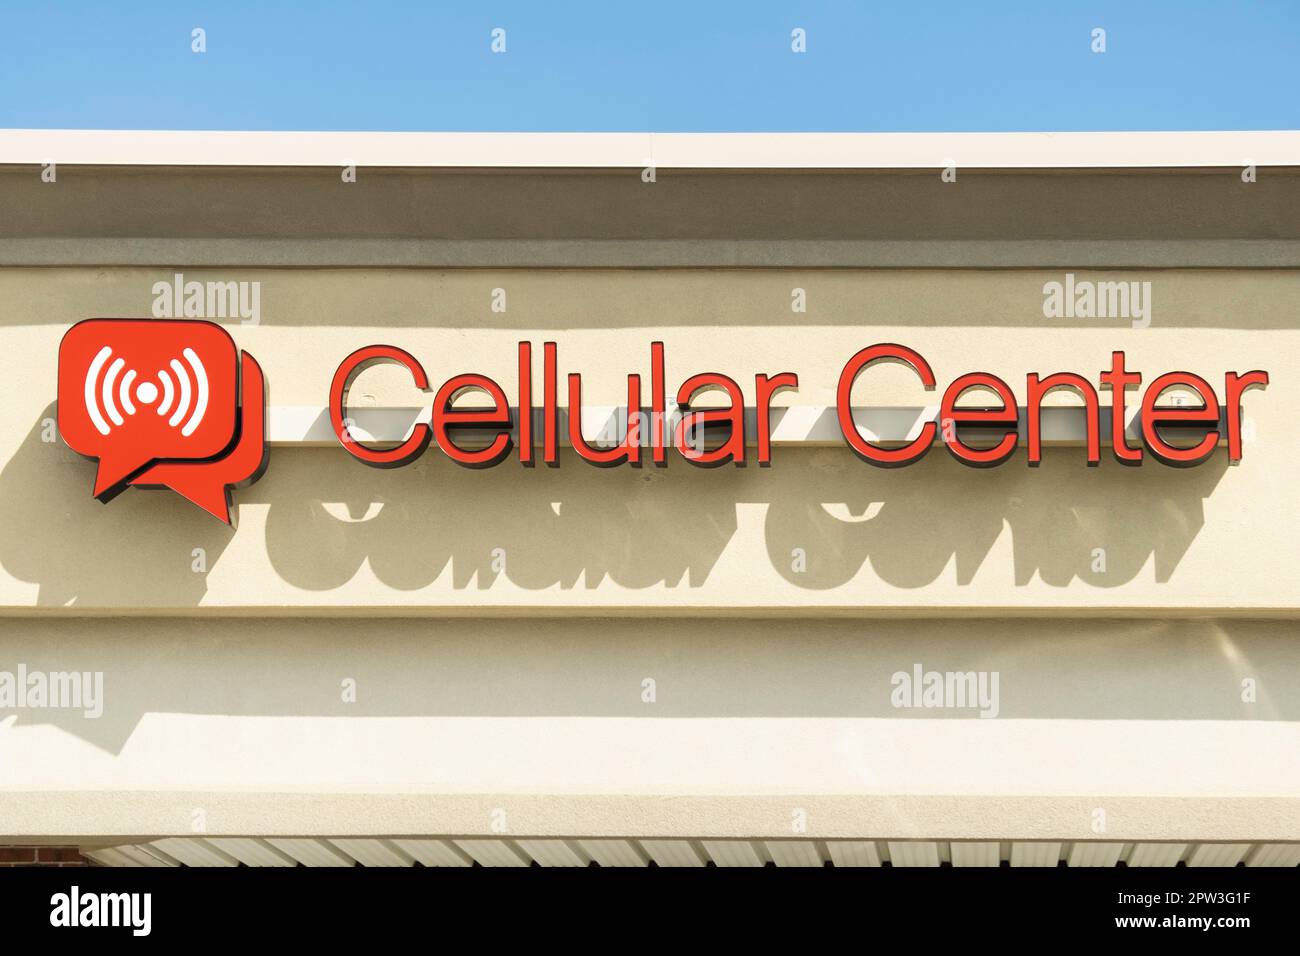 Exterior sign & logo for Cellular Center storefront a mobile phone & phone plan business in Wichita, Kansas, USA. Stock Photo